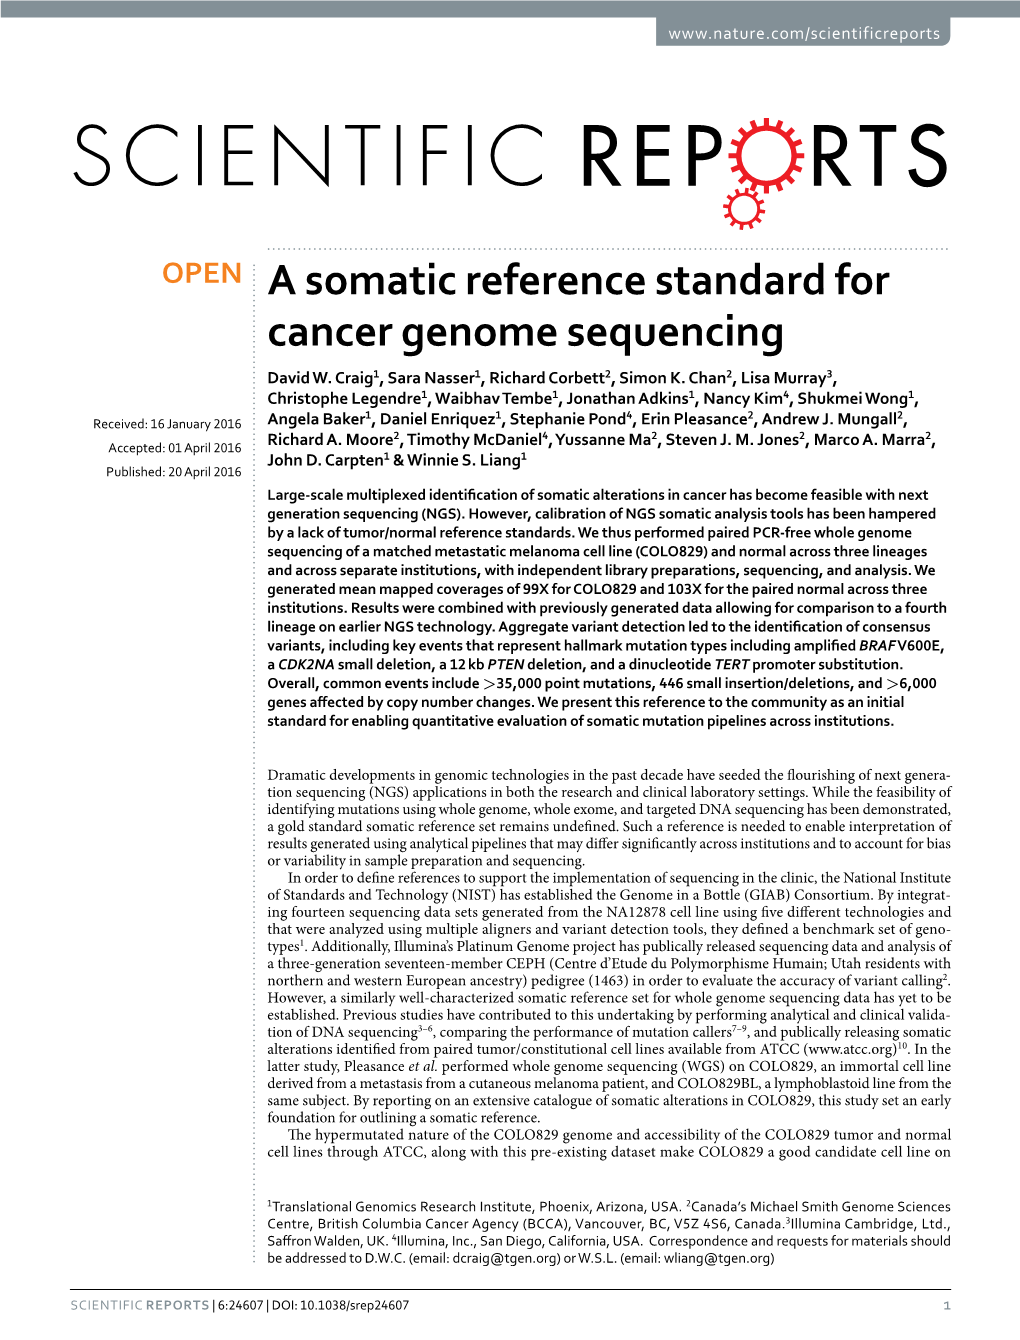 A Somatic Reference Standard for Cancer Genome Sequencing David W